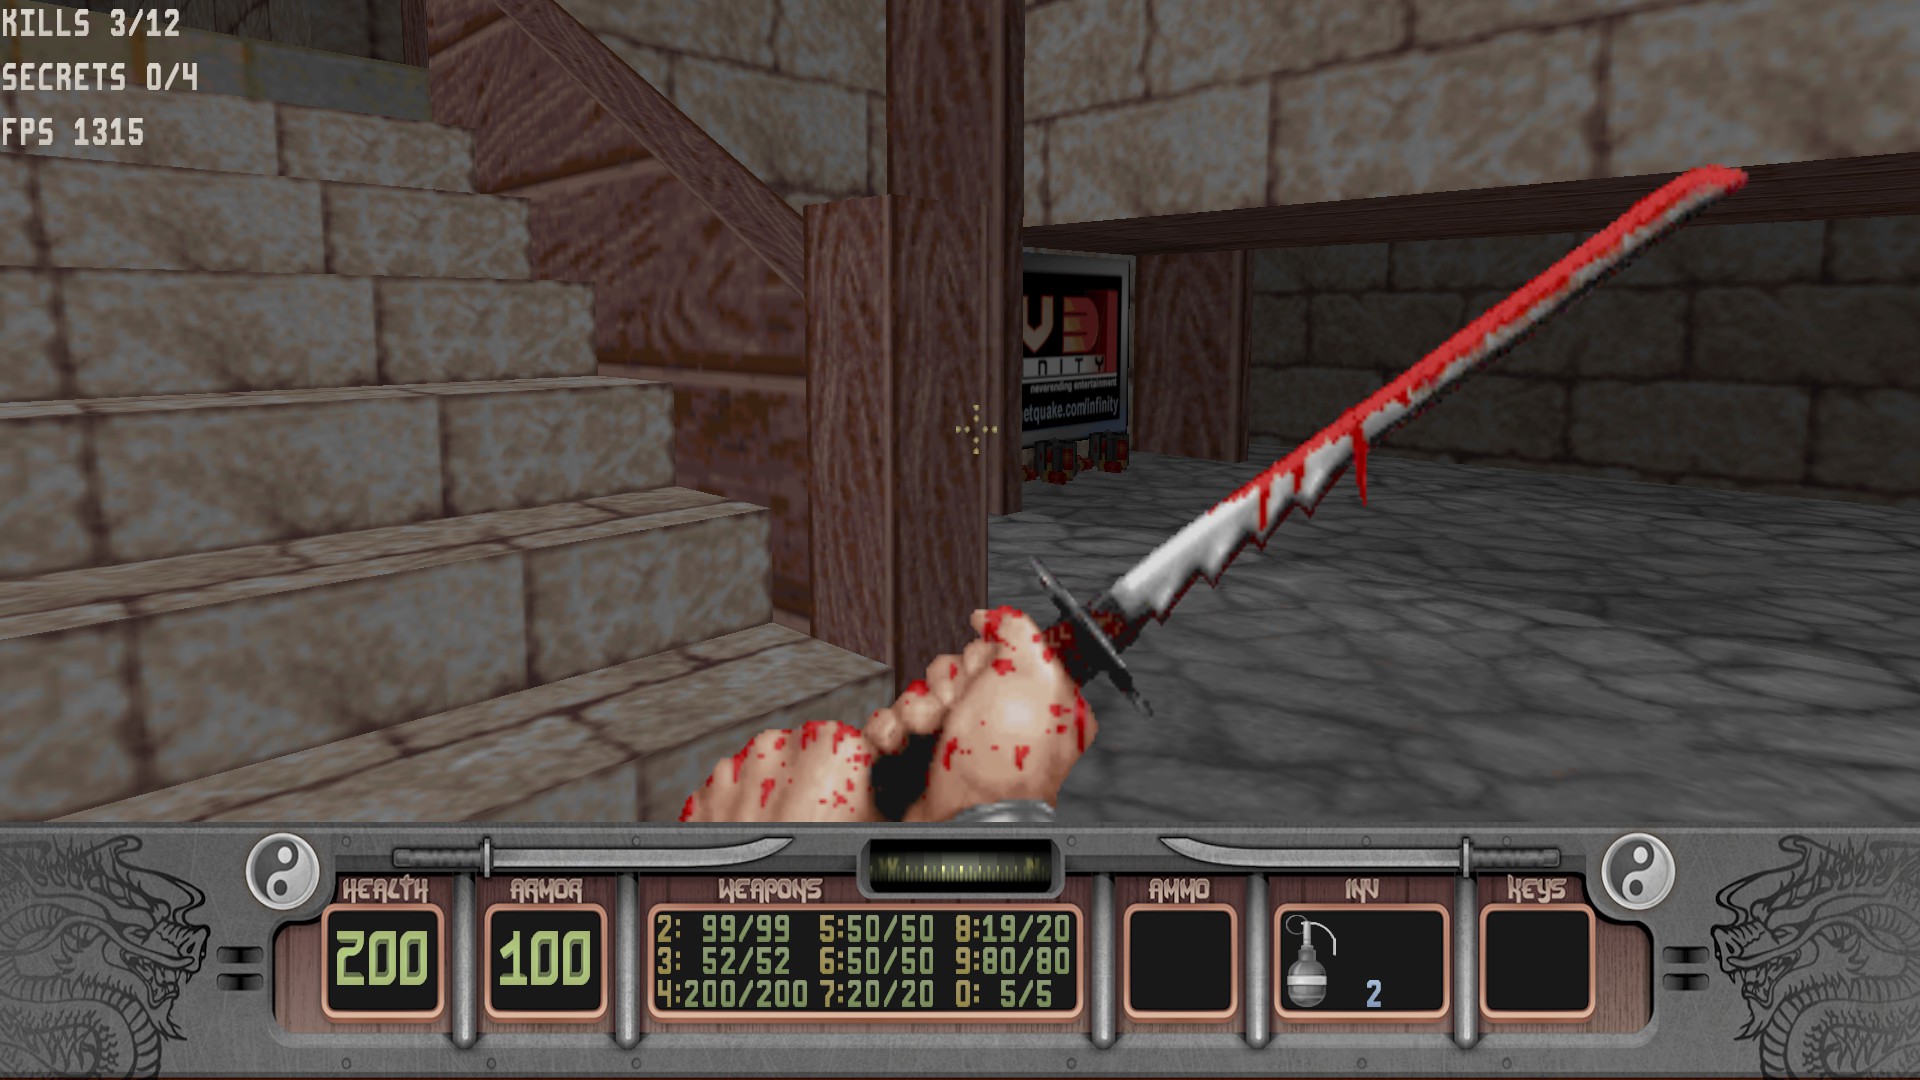 Shadow Warrior finally makes the jump from PC to Android